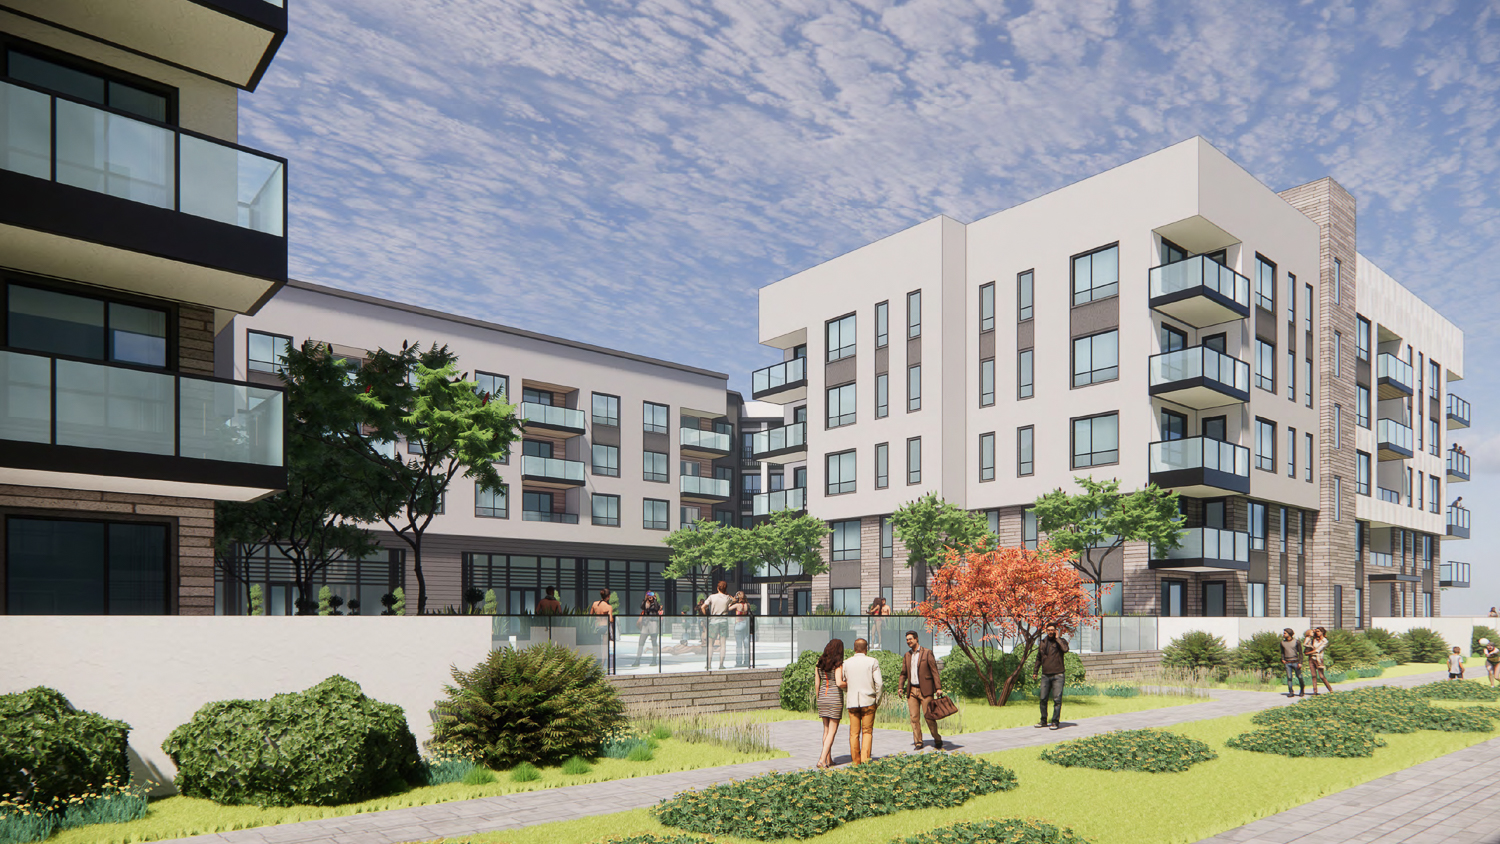 2100 Q Street view of the mid-block amenity space from the public paseo, rendering by TCA